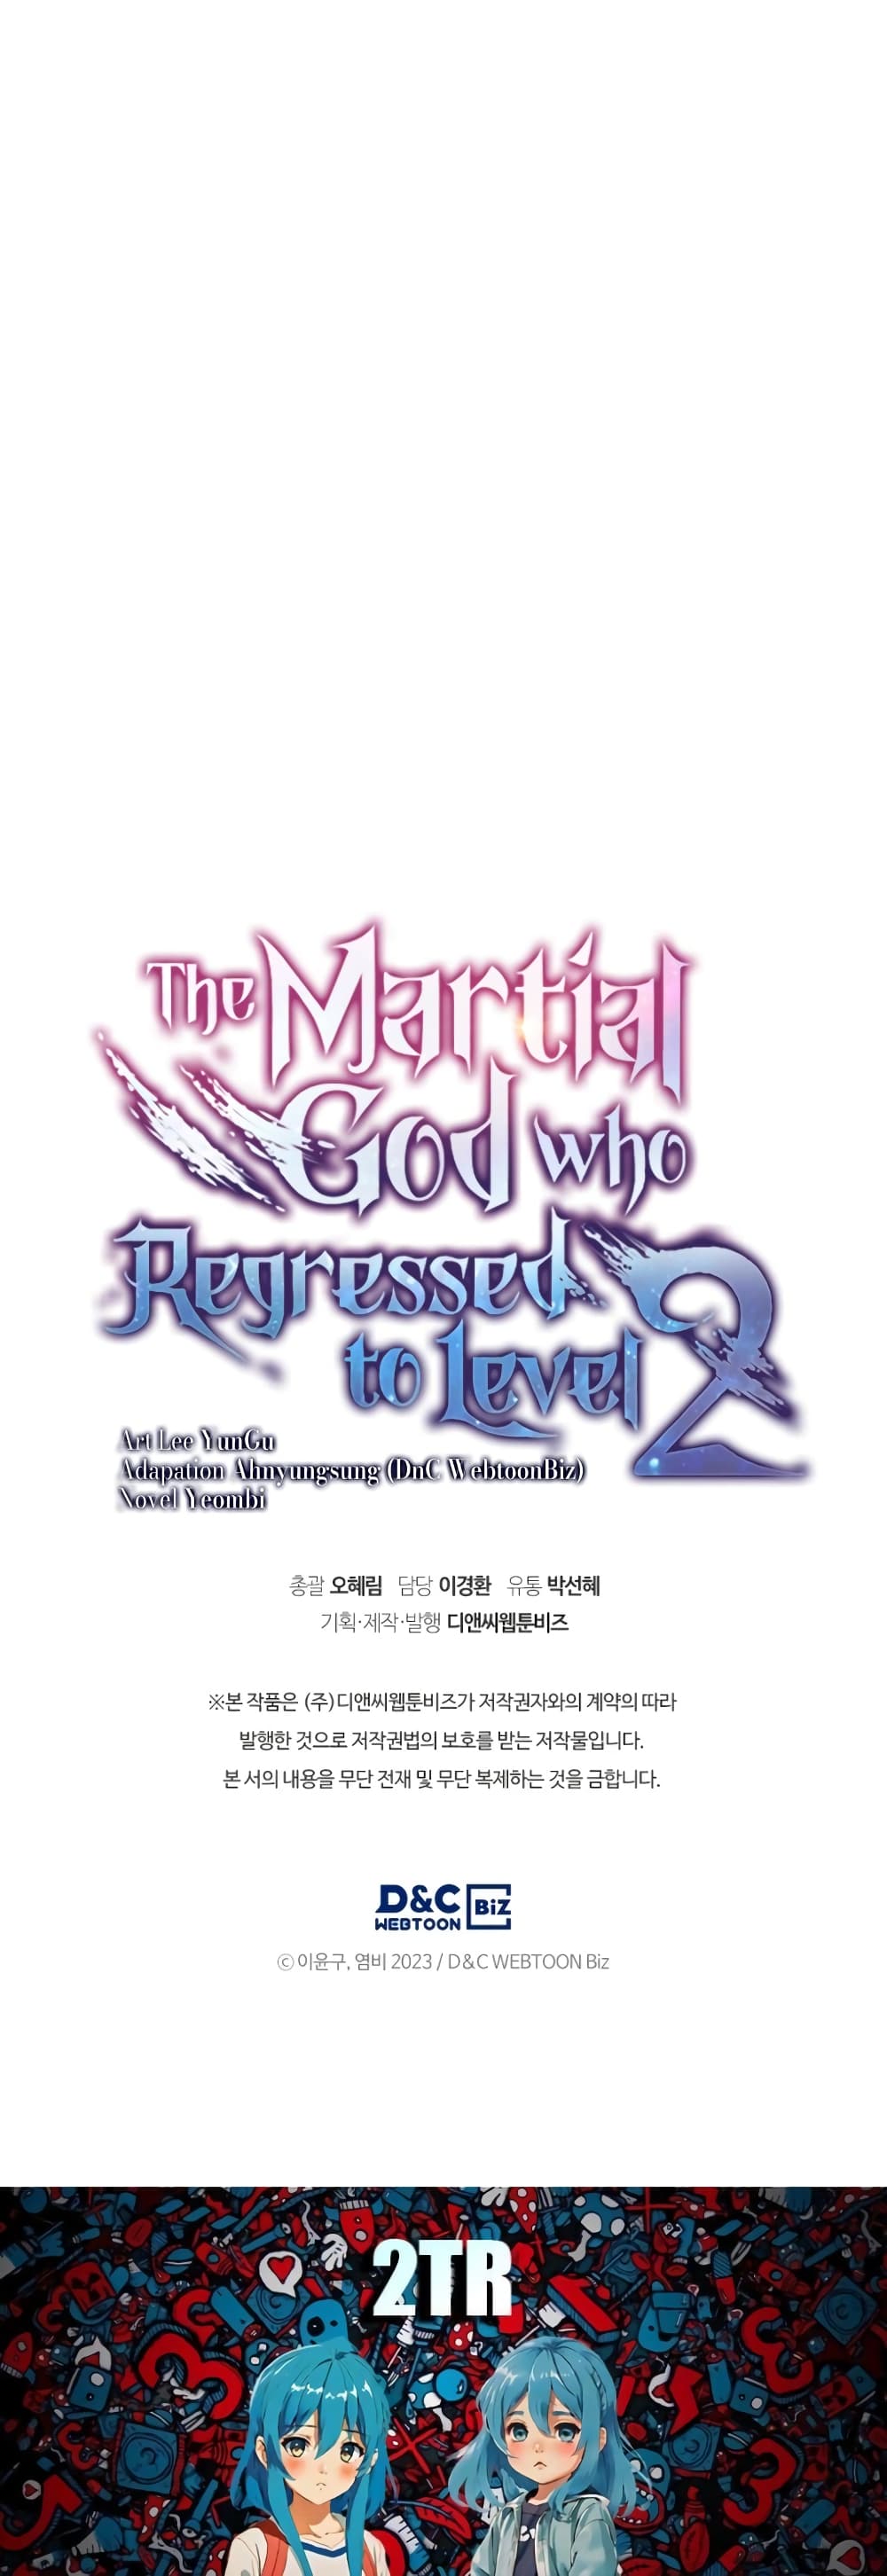 Martial God Regressed to Level 2 12-12